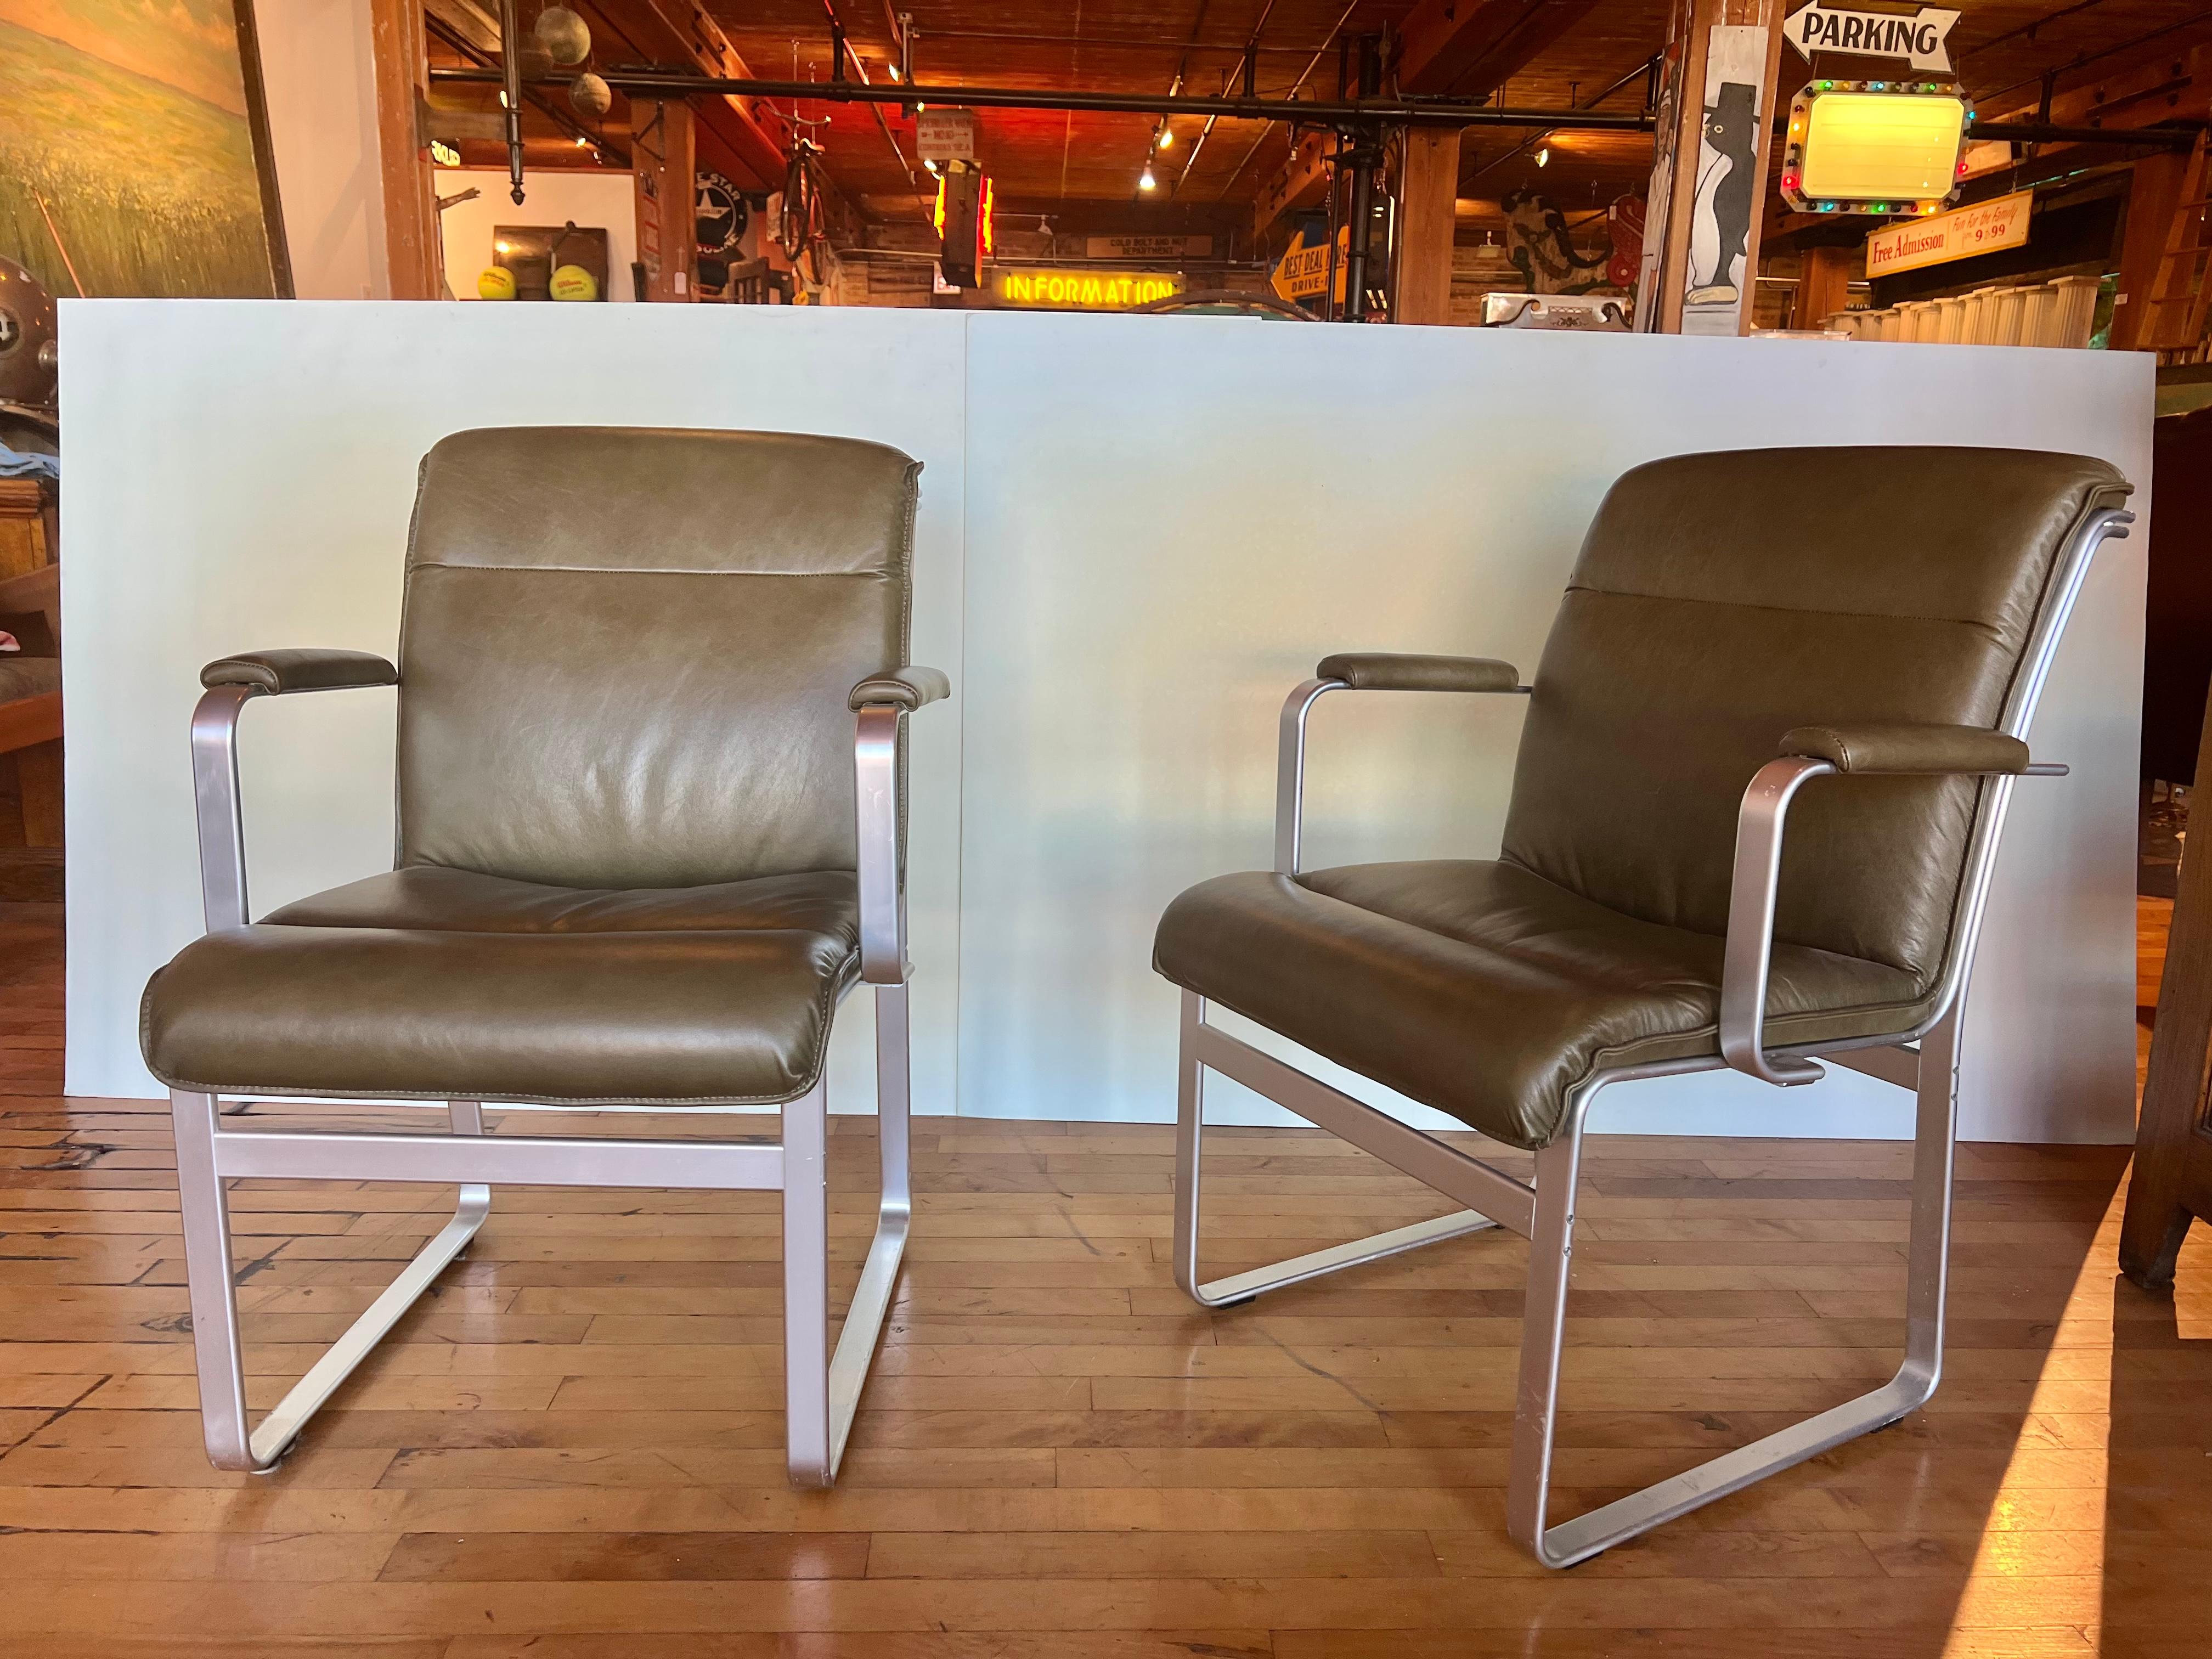 1960’s side armchairs with aluminum base and new leather upholstery. Designed by Karl Erik Ekselius. Arm height 26”.